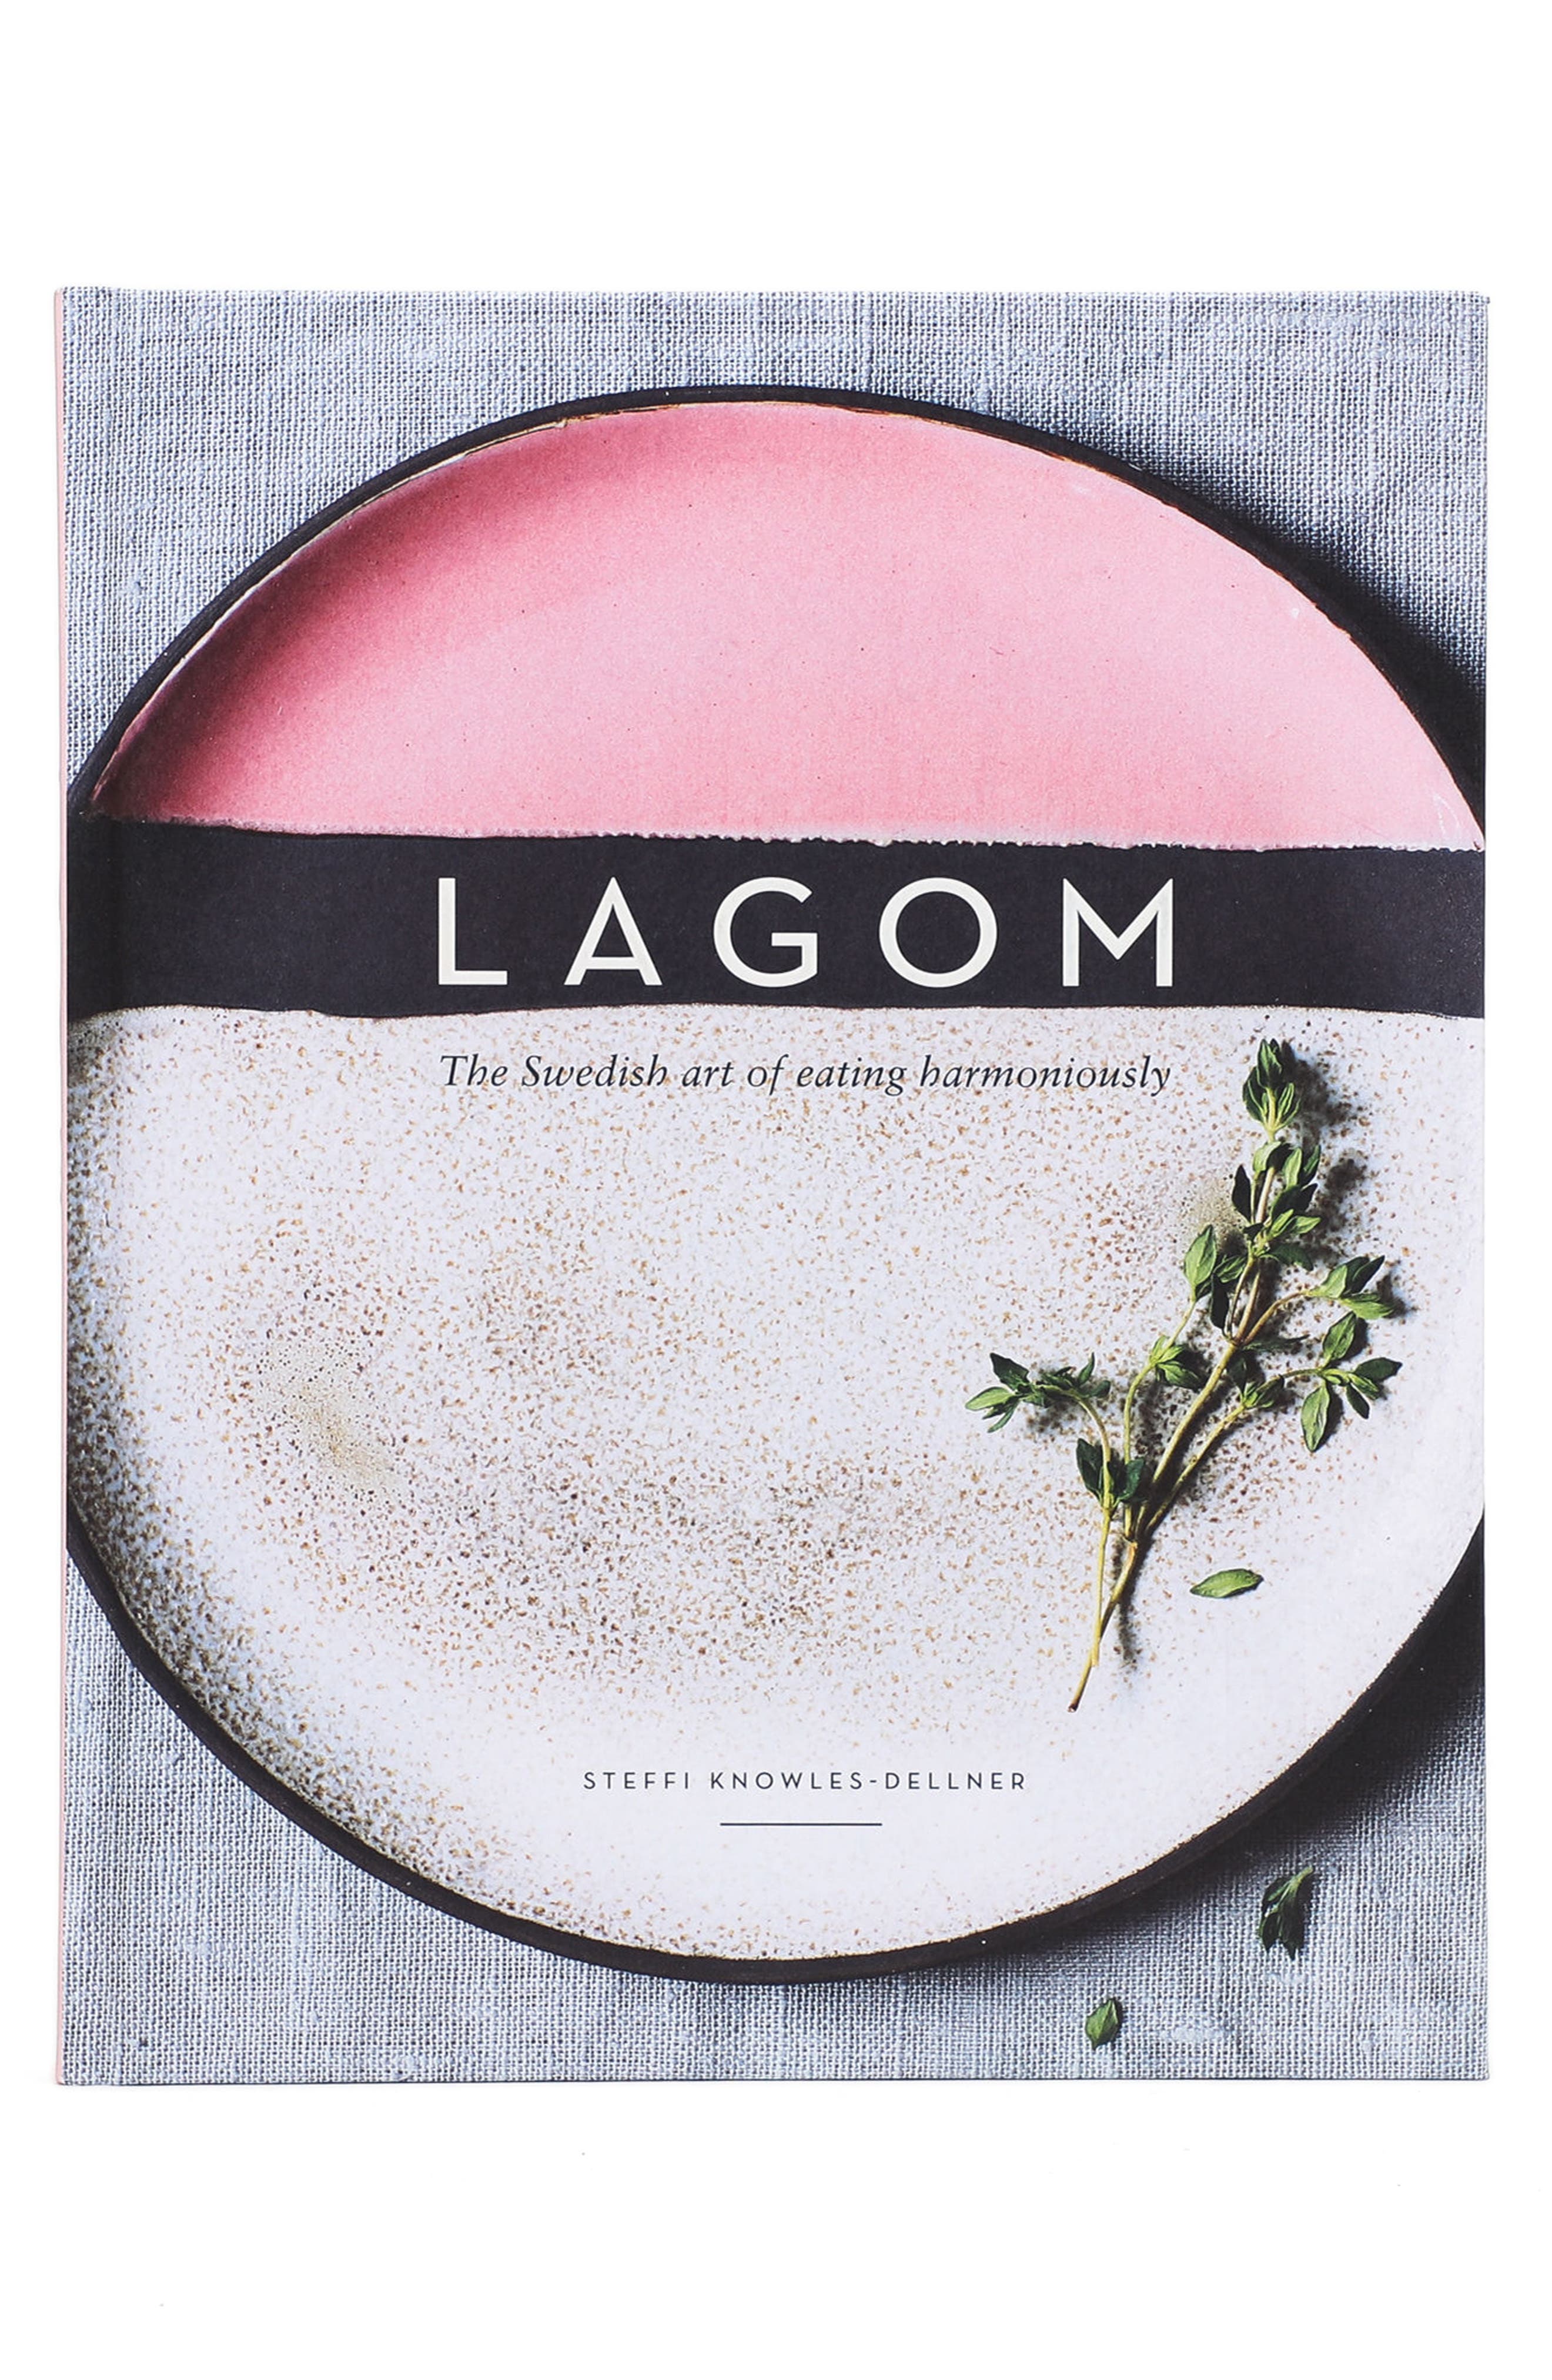 ISBN 9781787130371 product image for 'Lagom: The Swedish Art Of Eating Harmoniously' Book, Size One Size - Pink | upcitemdb.com